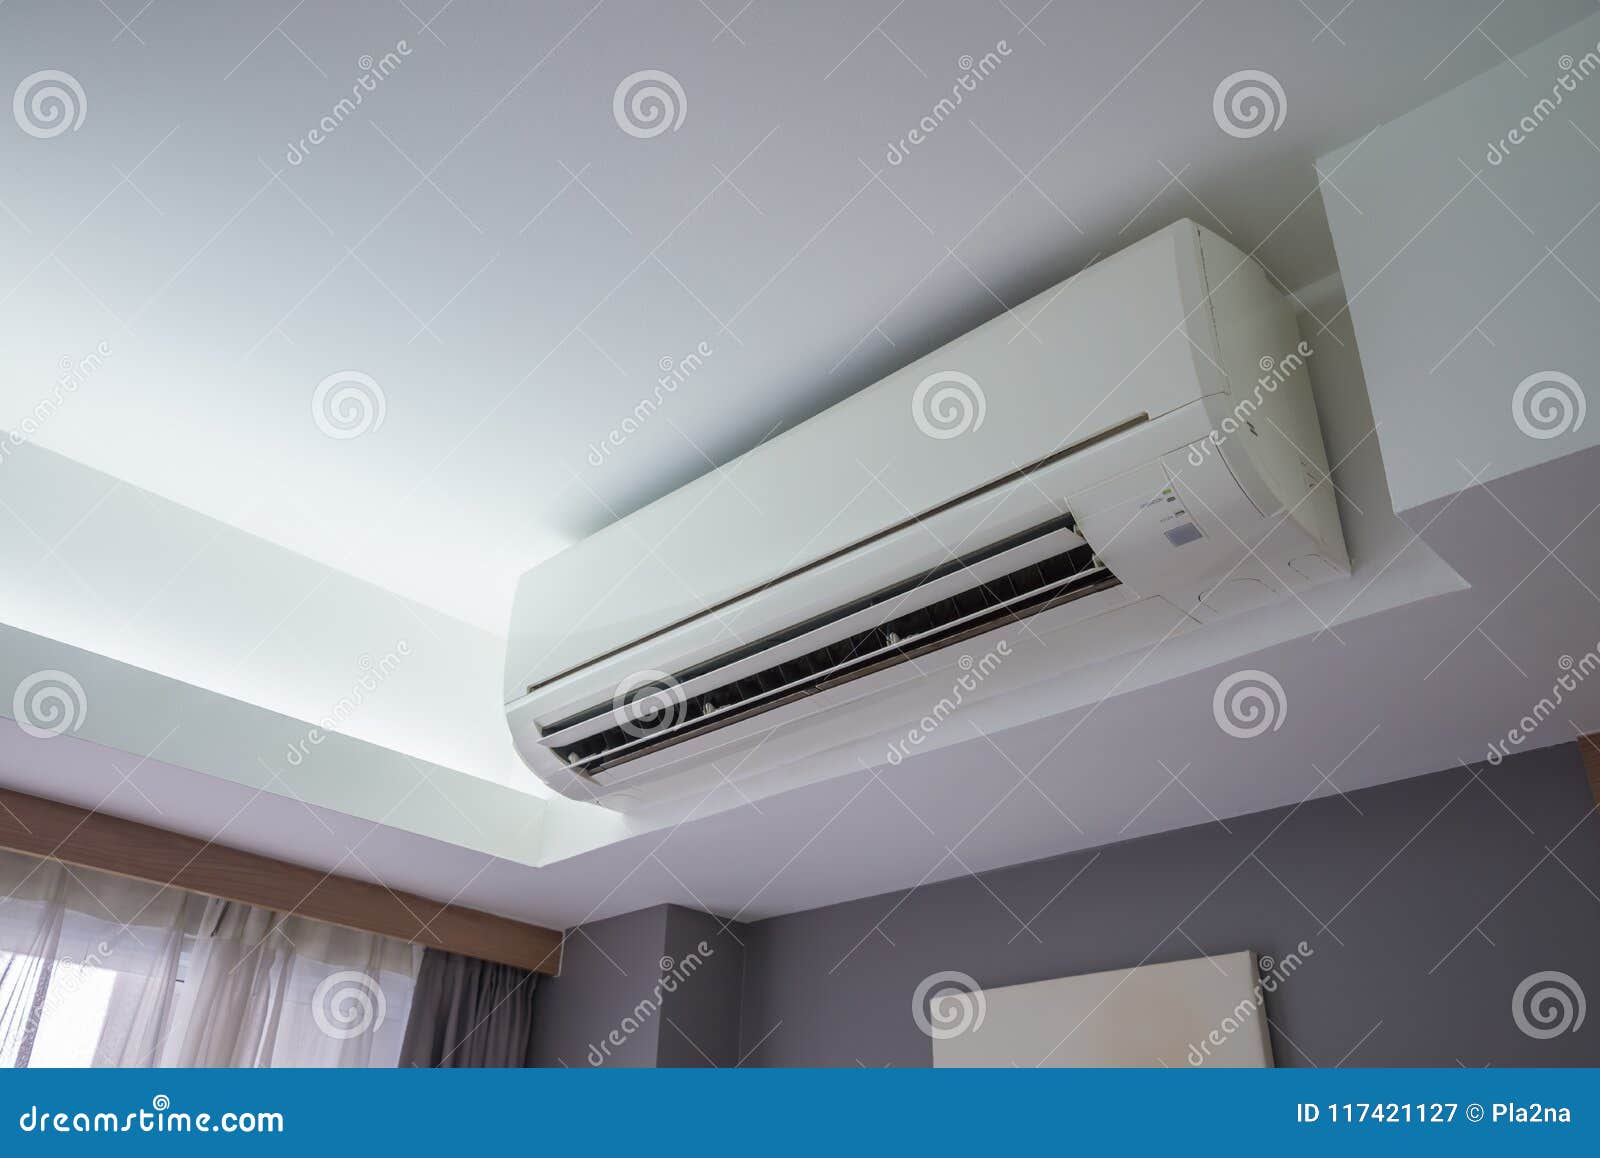 Air Conditioner Cooling Fresh System In Hotel Bedroom Stock